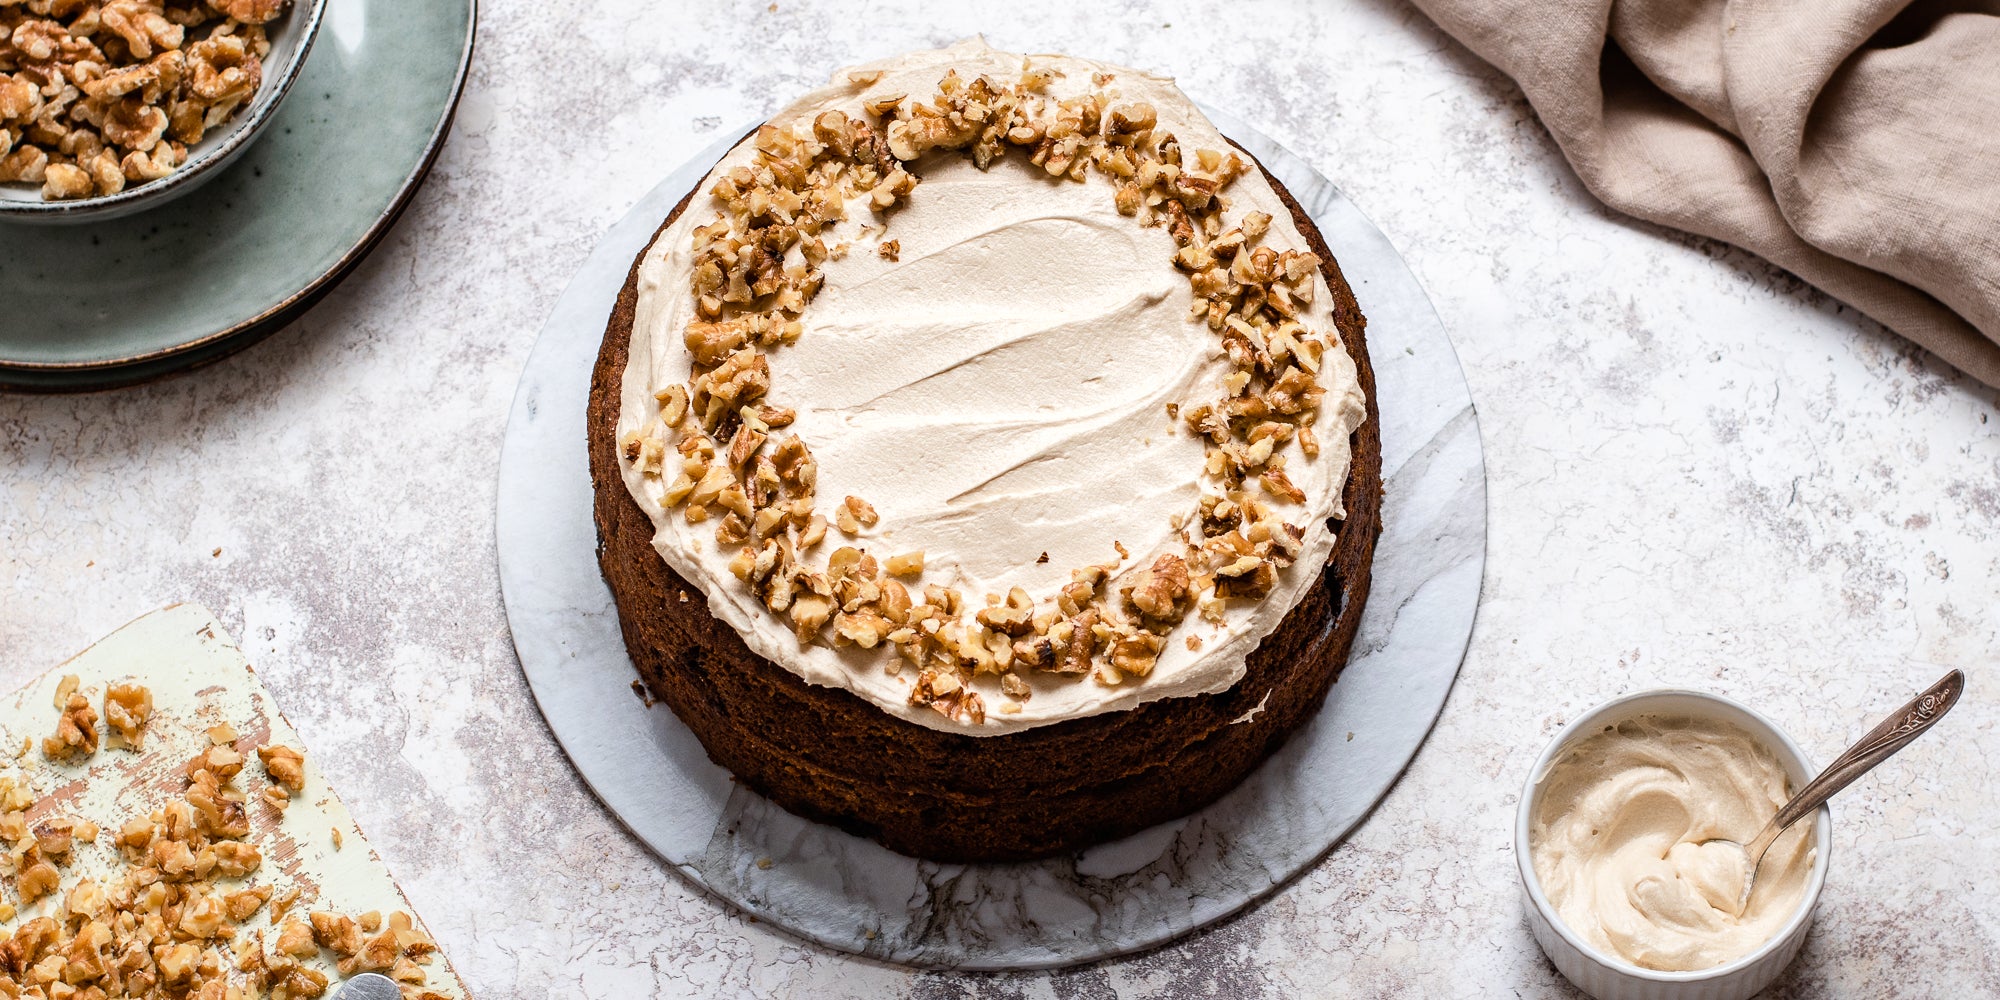 Gluten Free Vegan Coffee Cake hand decorated with chopped nuts and buttercream